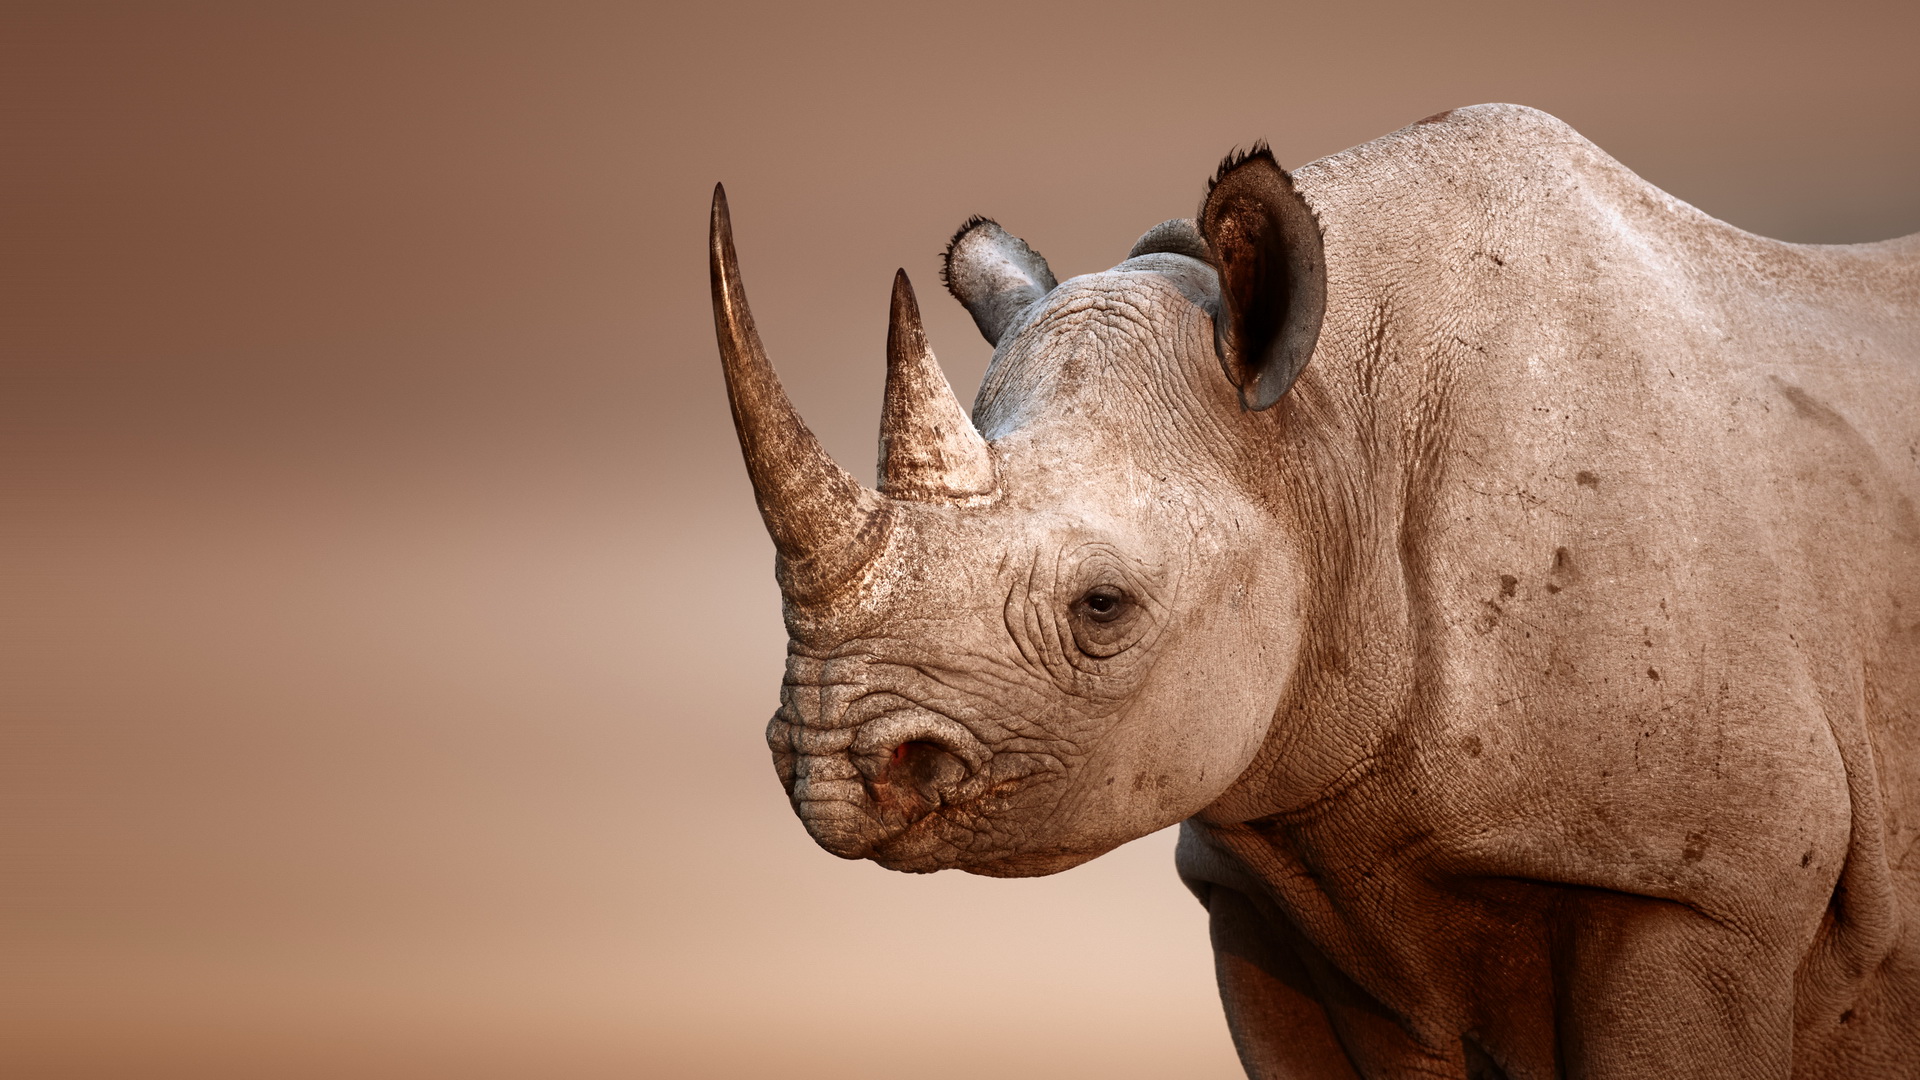 Rhino phone wallpaper 1080P 2k 4k Full HD Wallpapers Backgrounds Free  Download  Wallpaper Crafter